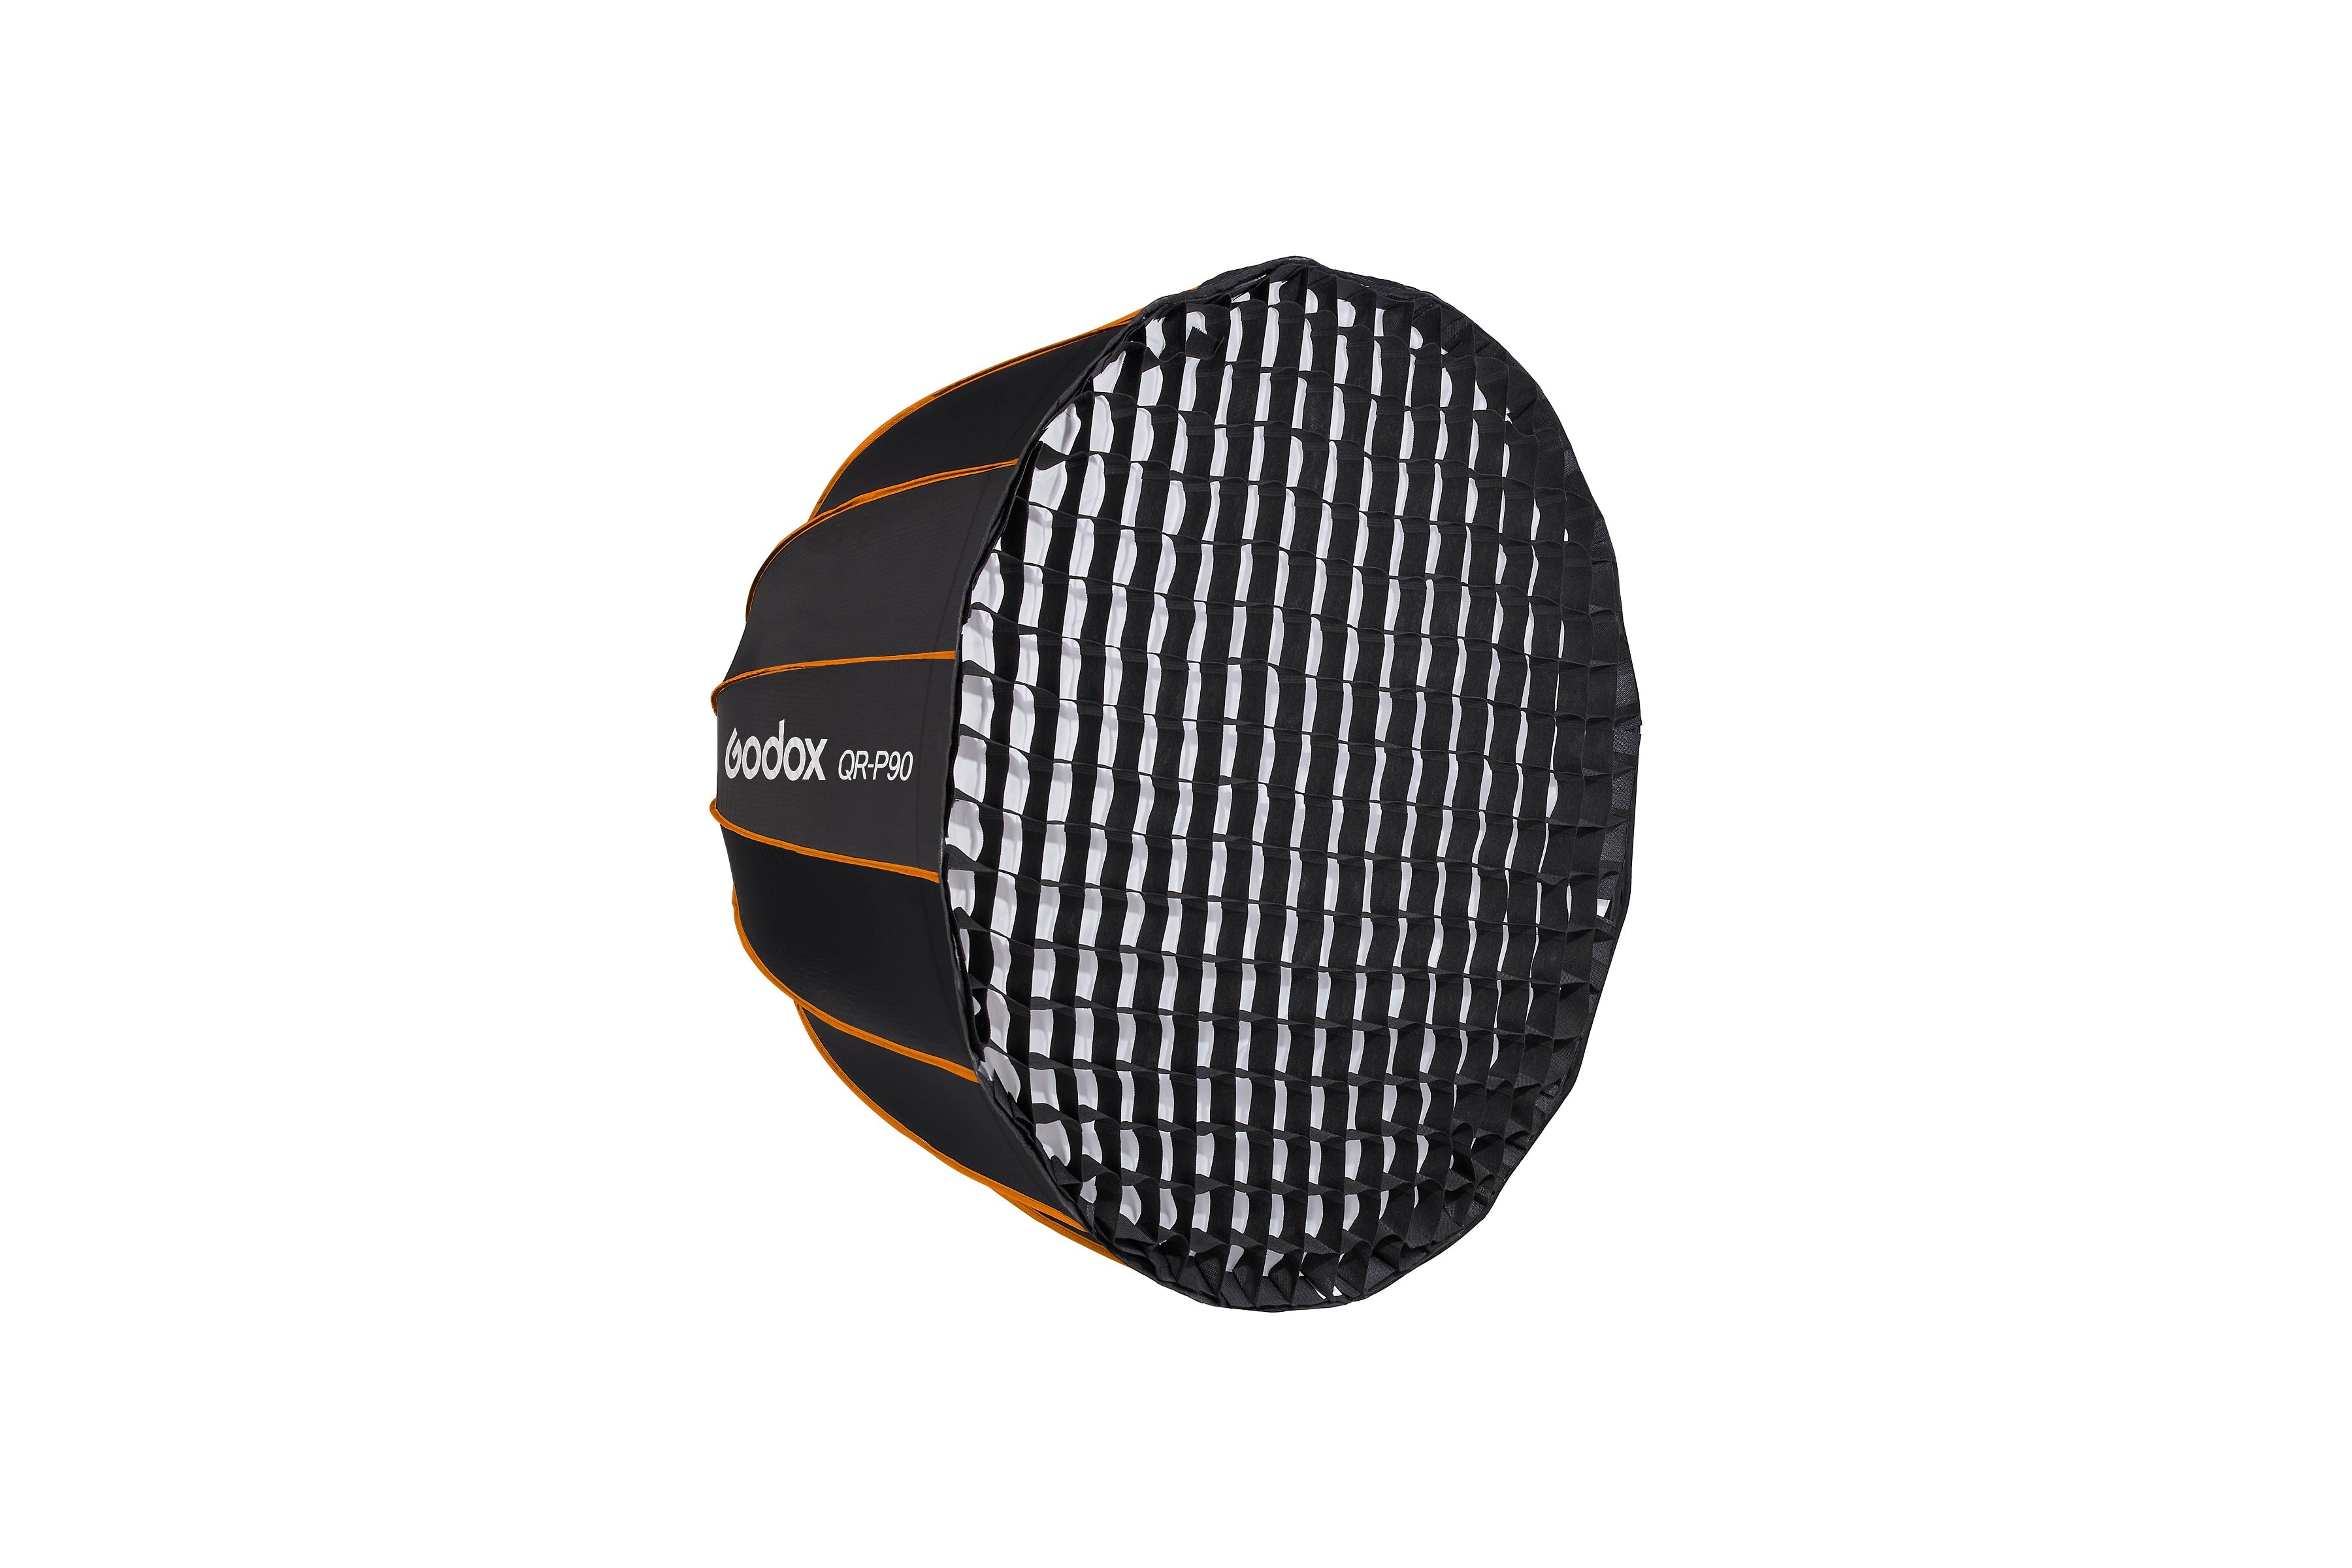 Buy Godox QR-P90 Quick Release Parabolic Softbox online from Sharp